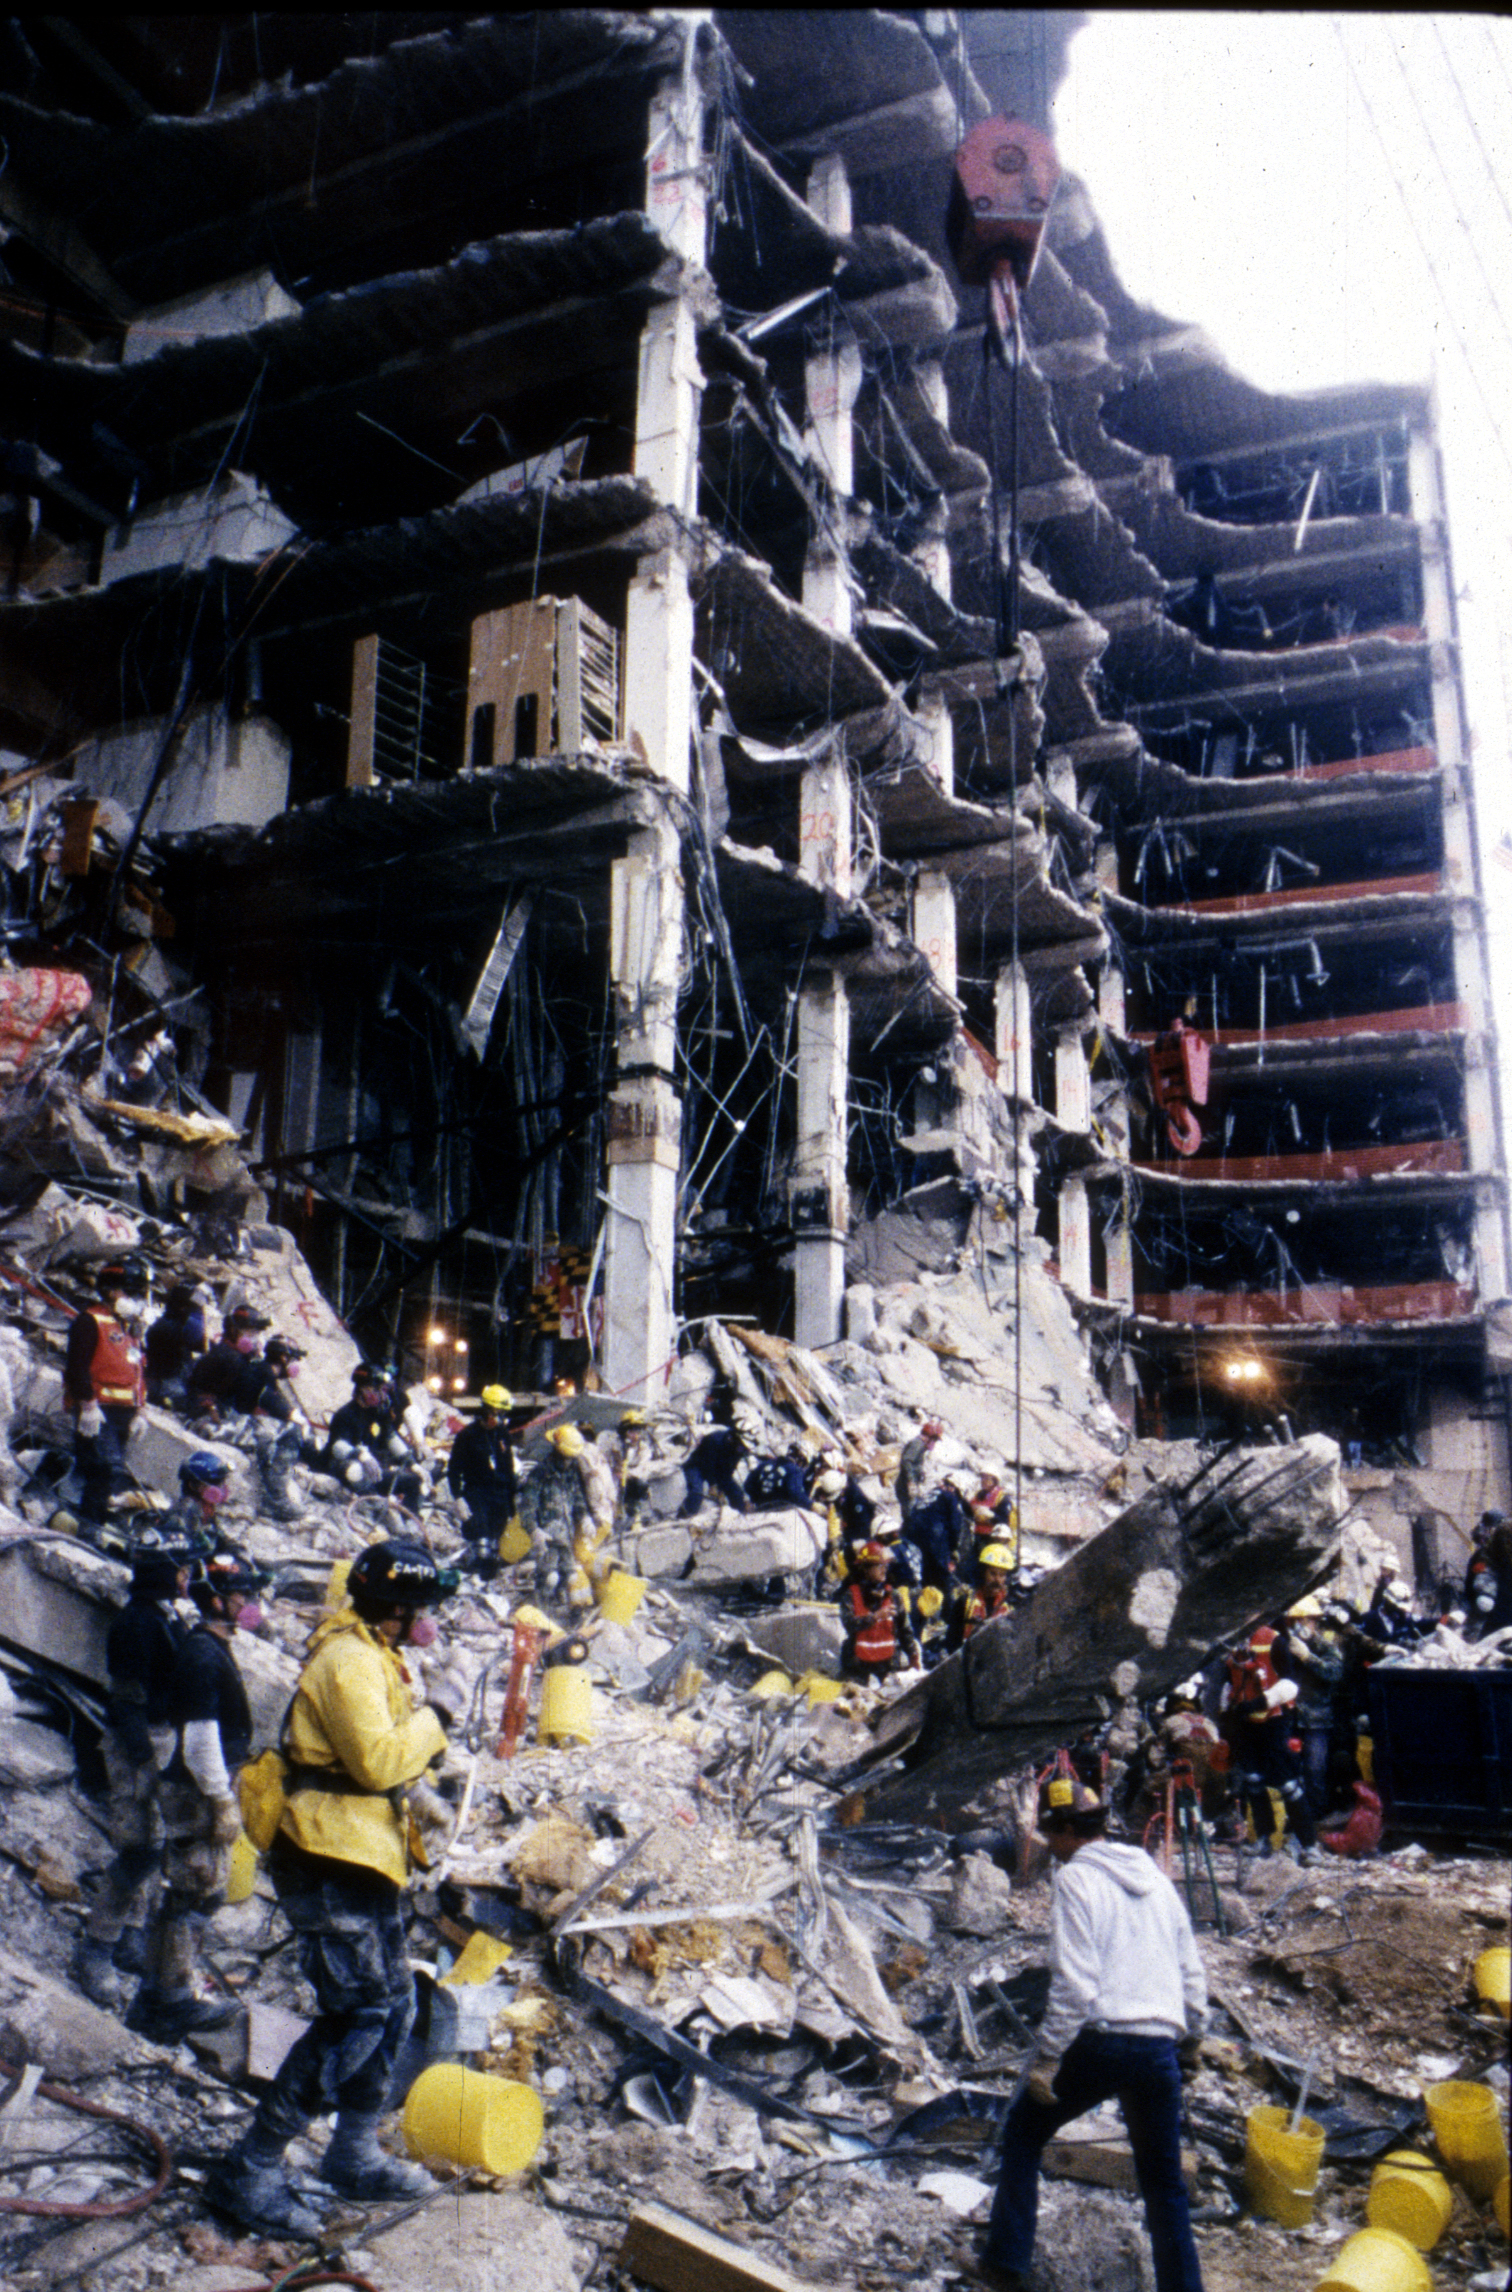 Oklahoma City Bombing - Search and Rescue crews work to save those trapped  beneath the debris (5) | Homeland Security